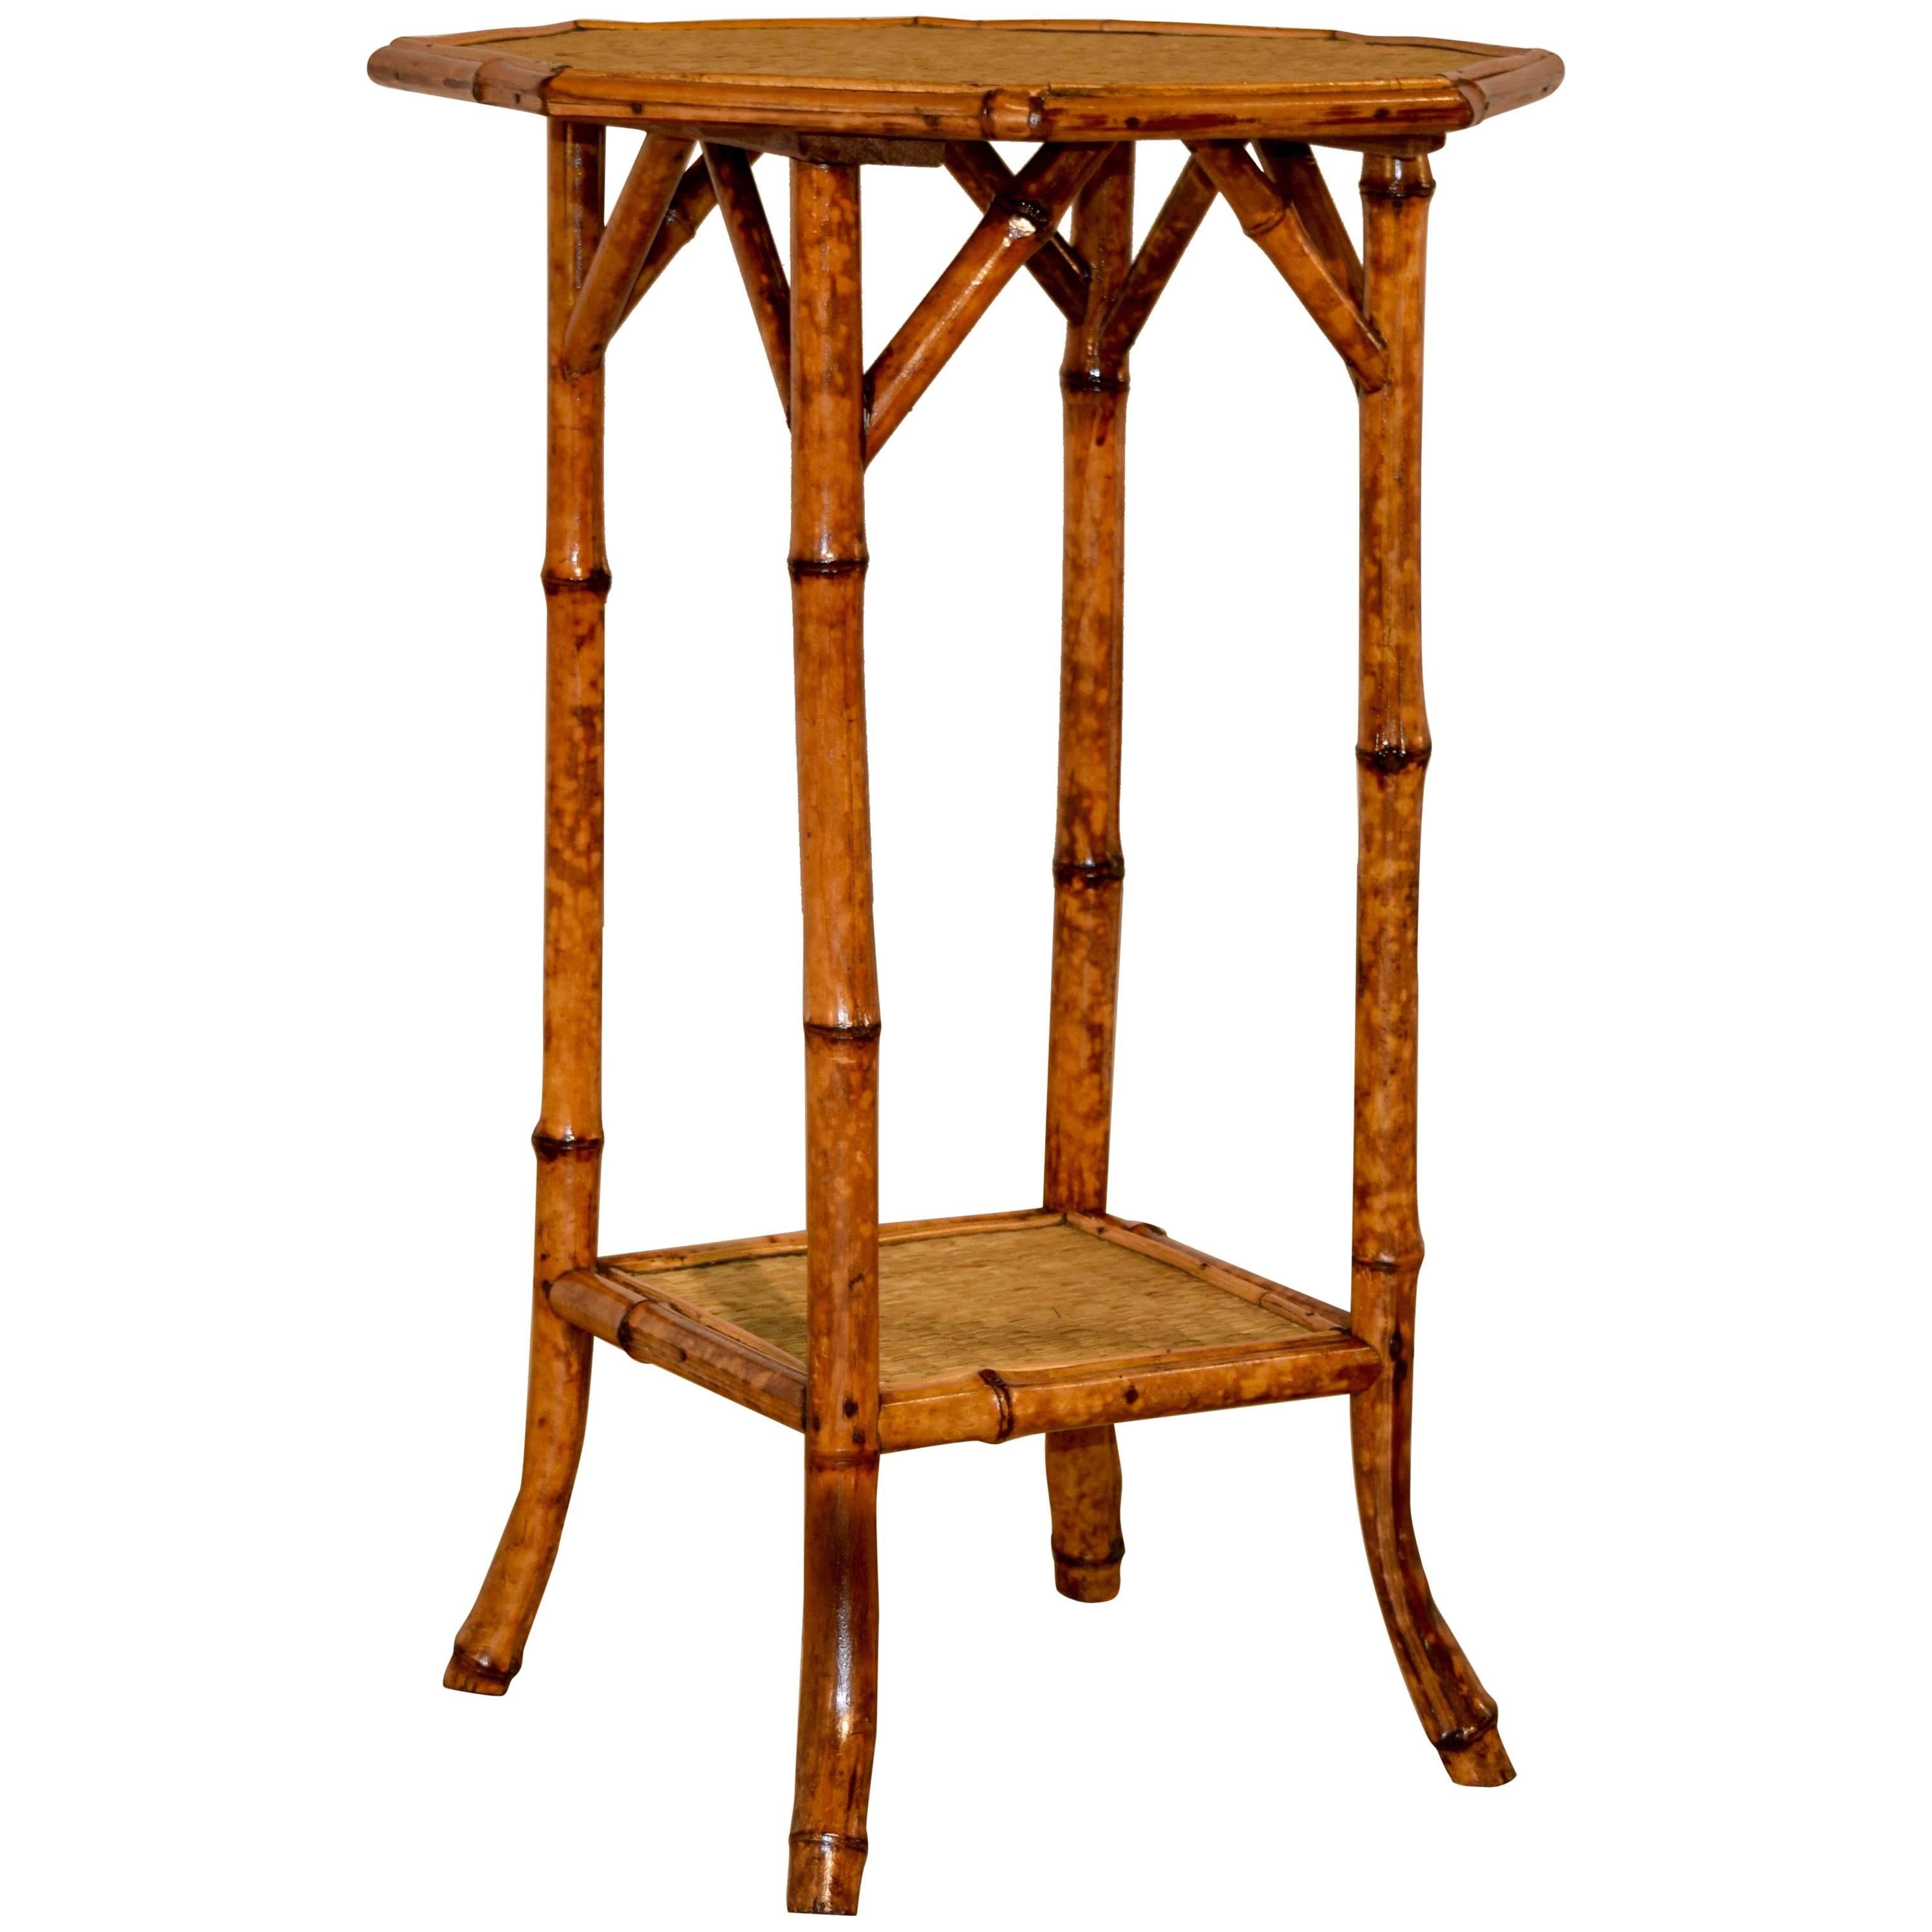 19th Century French Bamboo Side Table